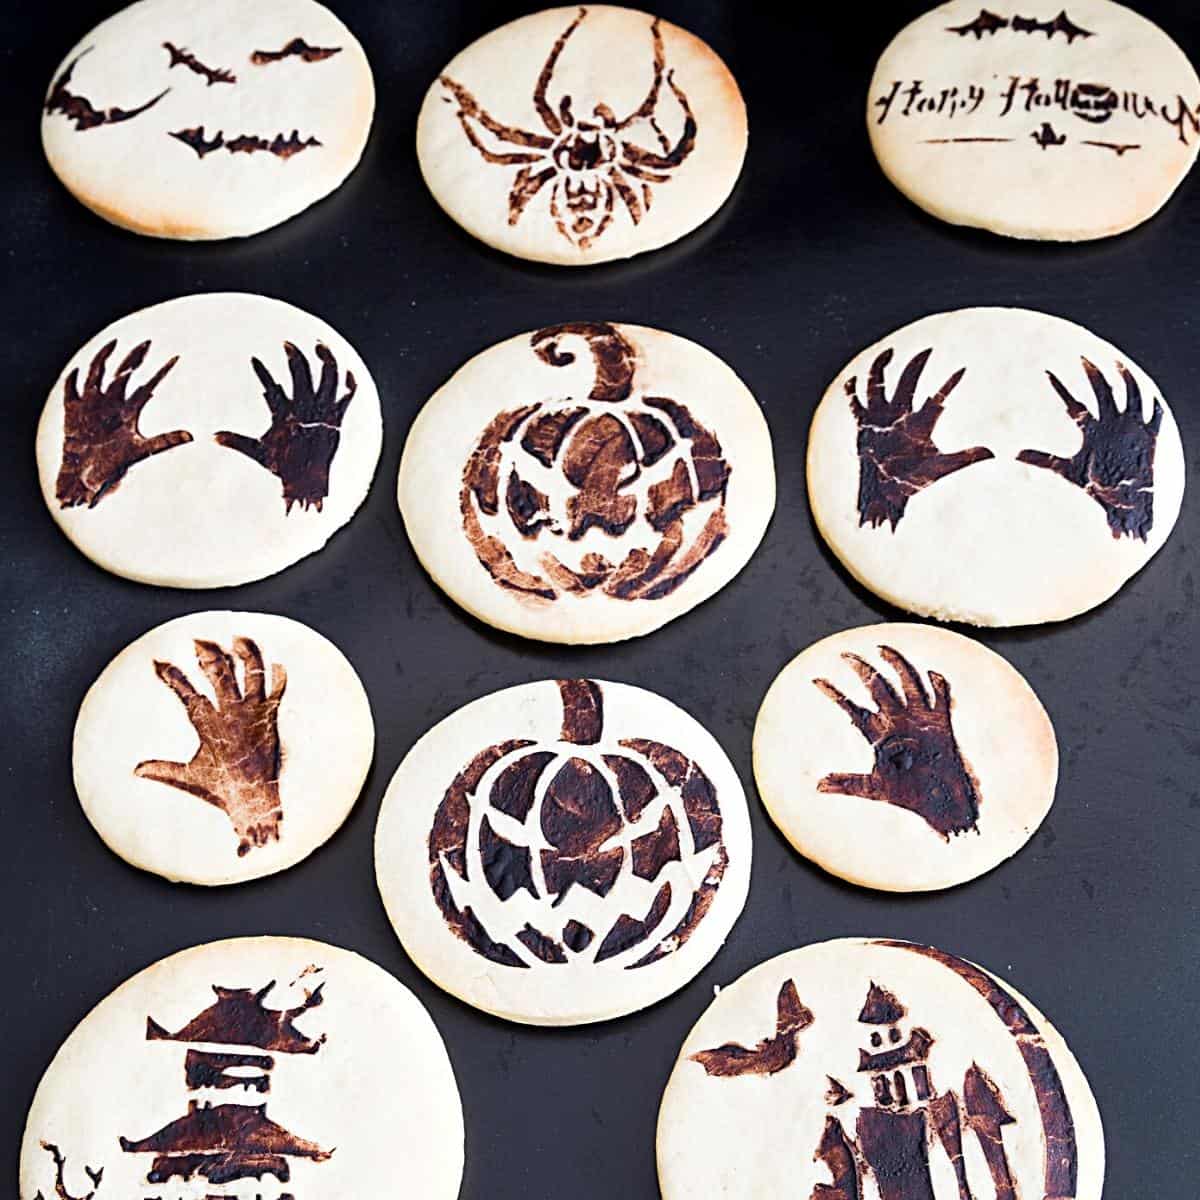 Stenciled cookies on the black board.